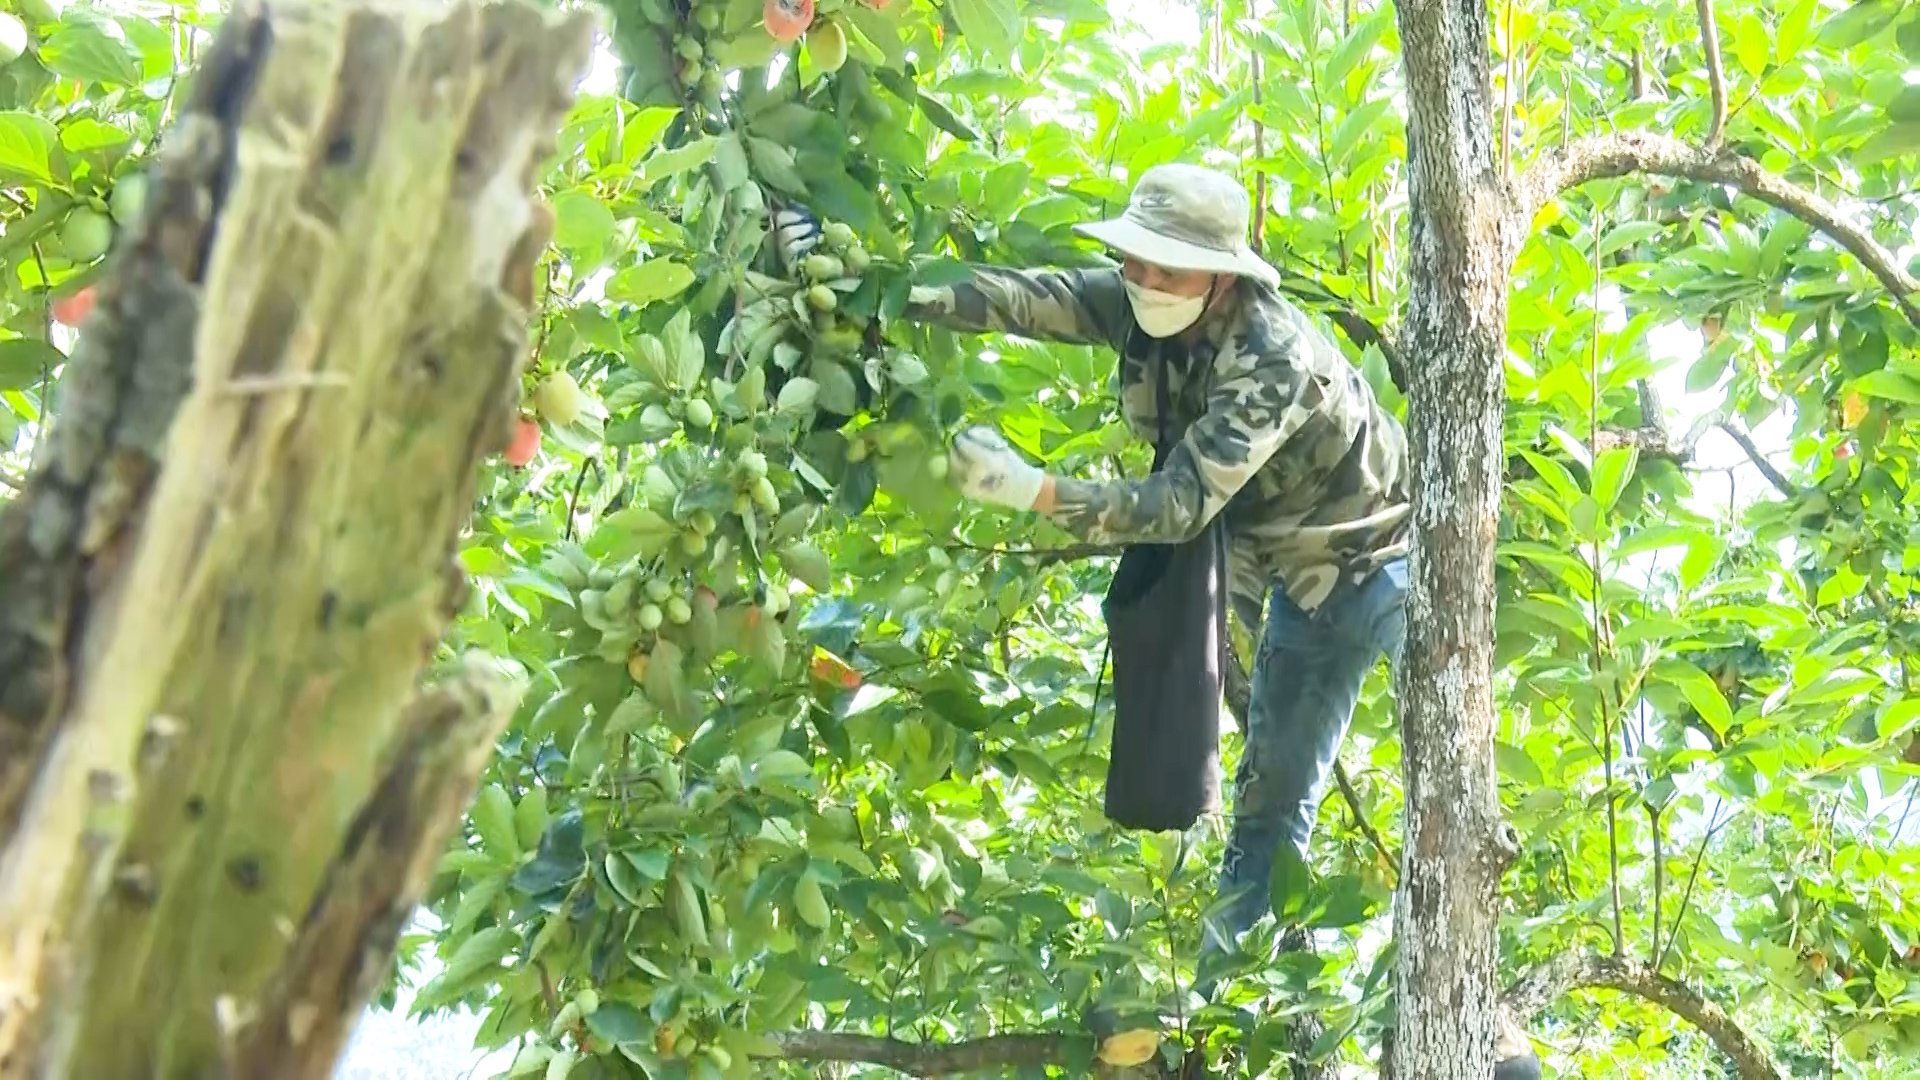 Harvesting seedless persimmons in Quang Khe commune (Ba Be district). Photo: Ha Nhung.